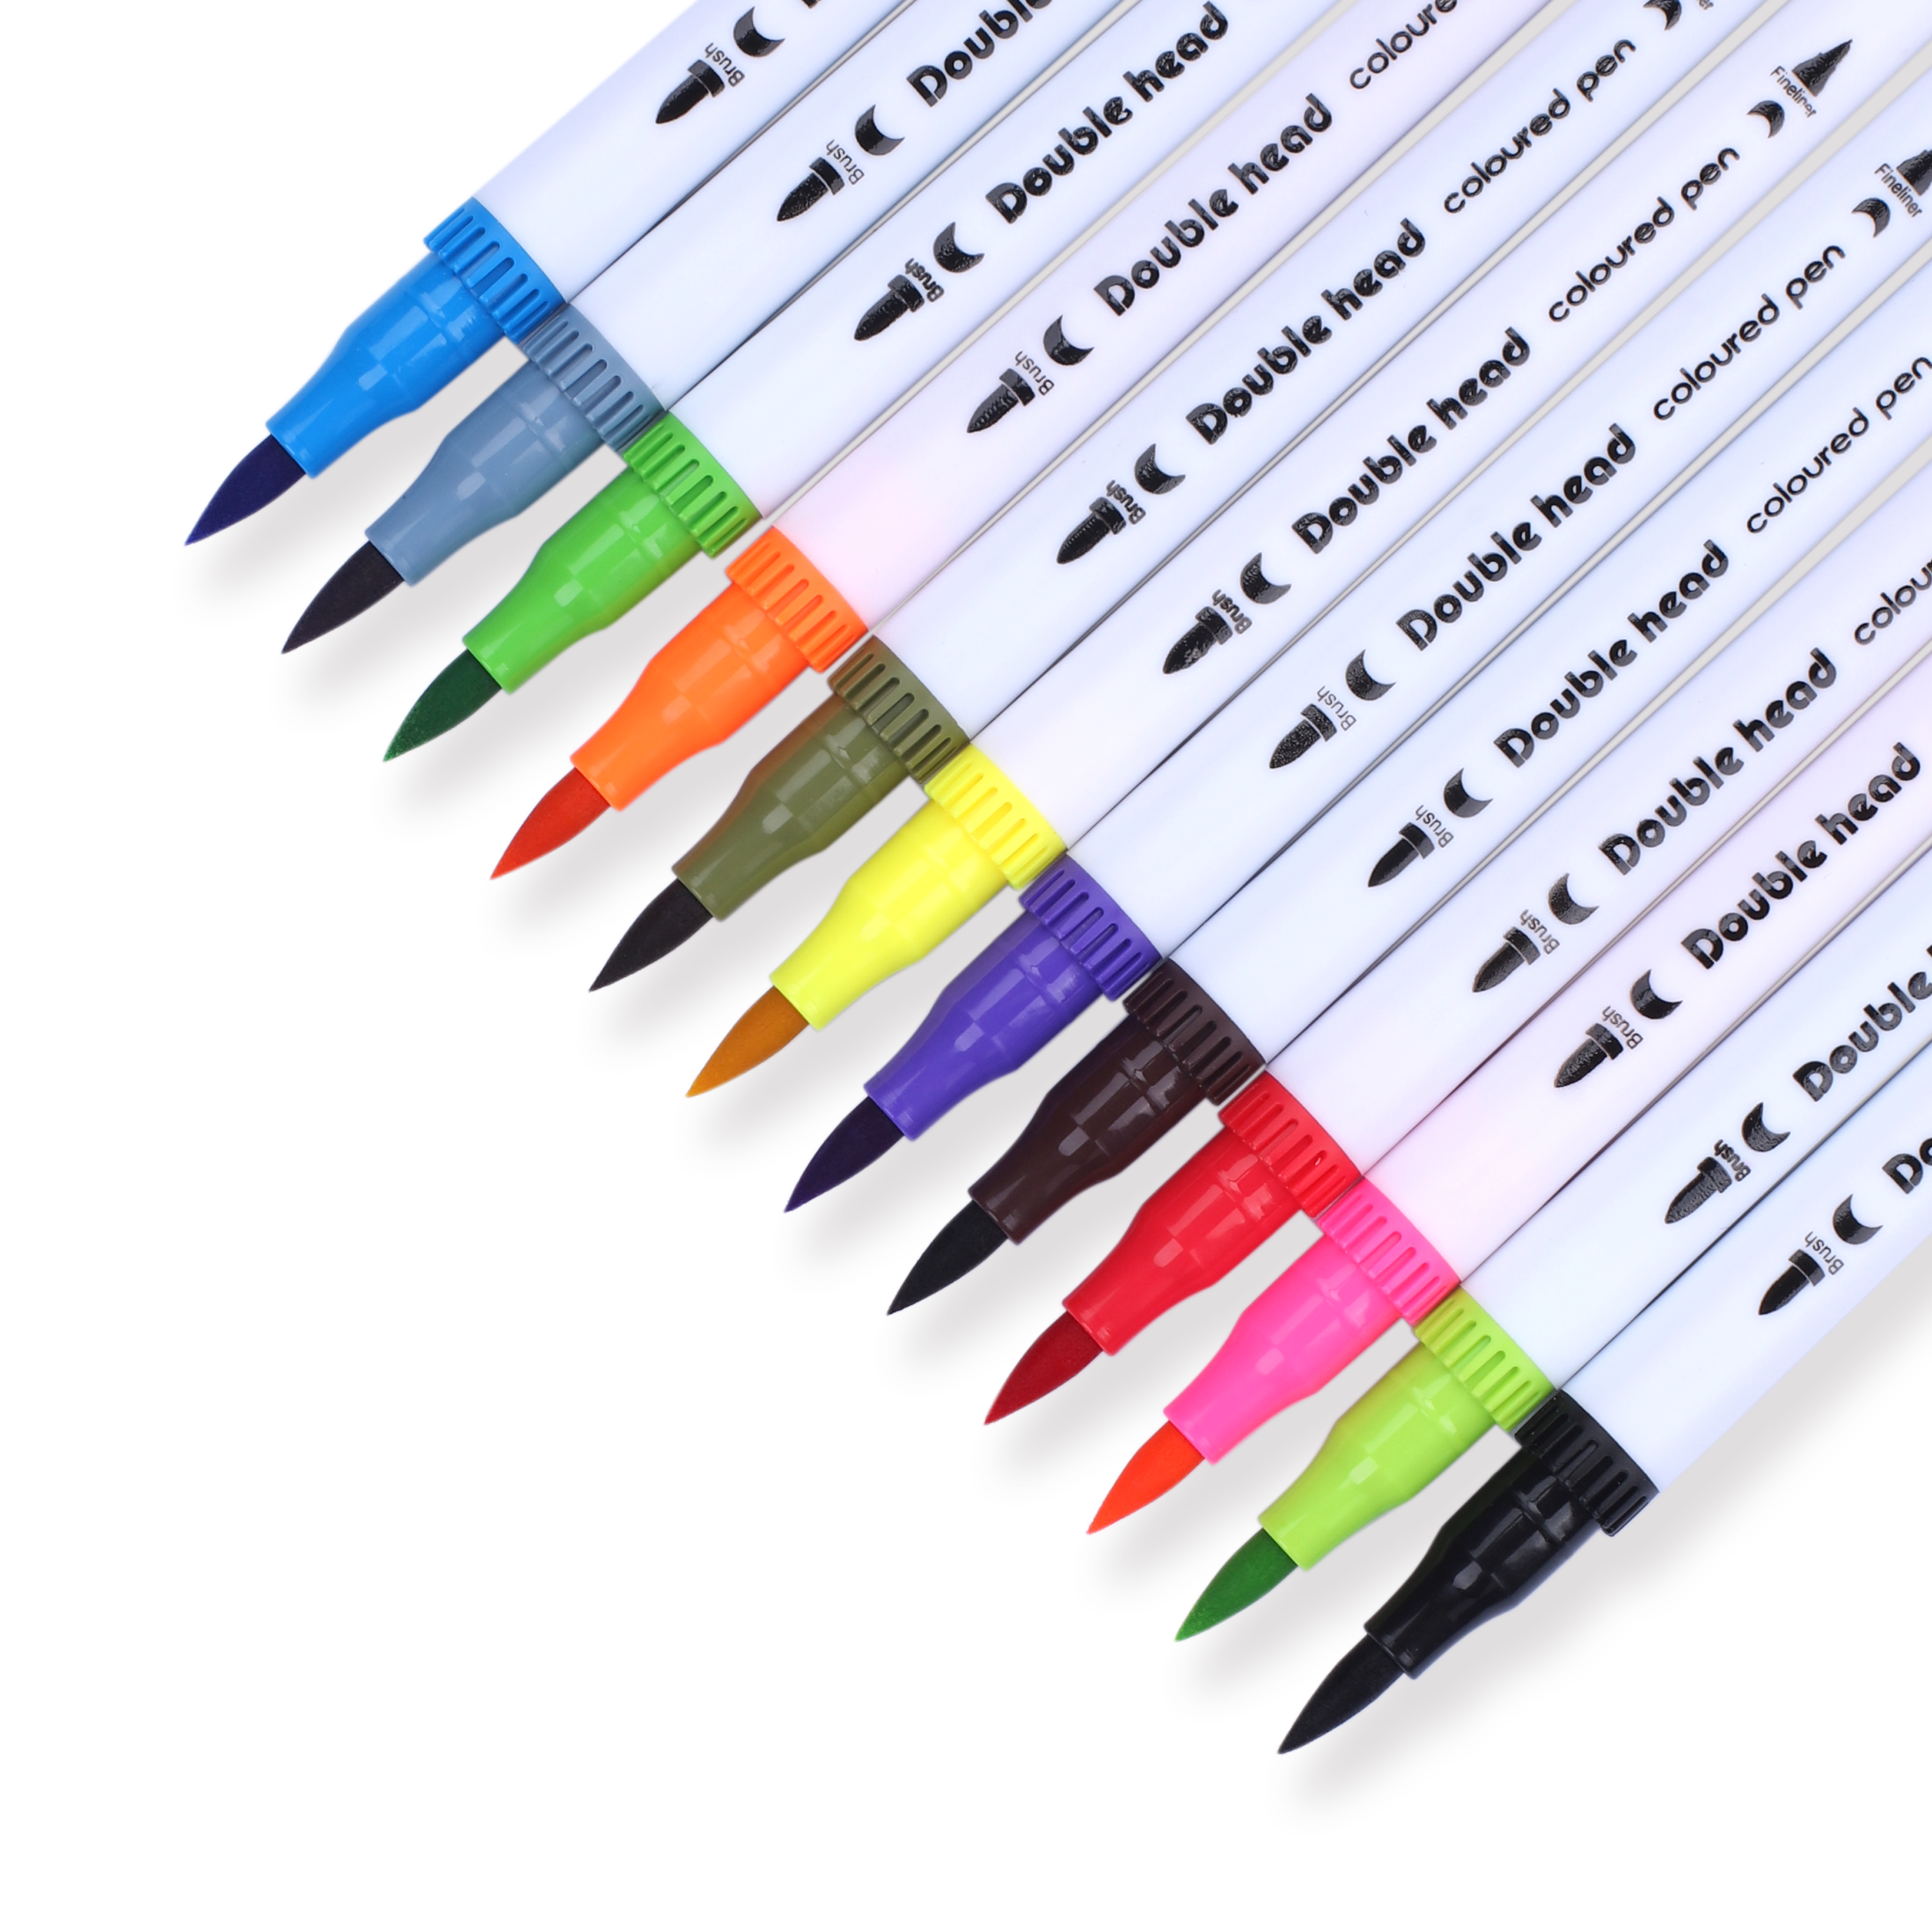 Full set of 12 Dripcolor Double ended Pen